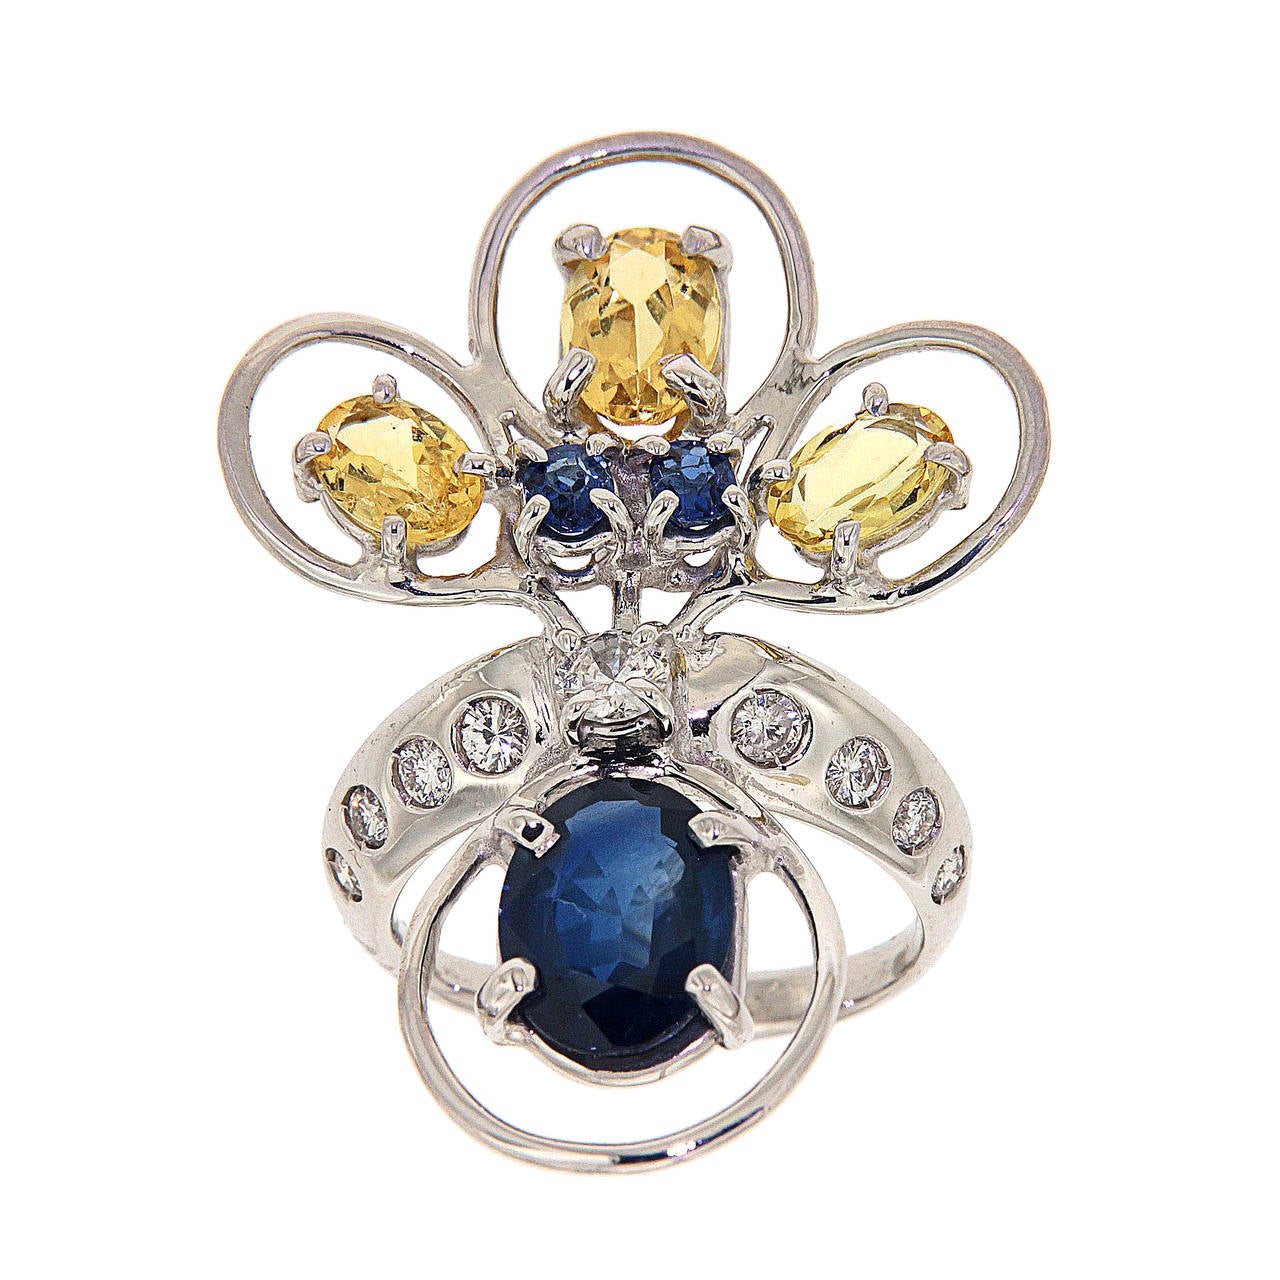 18kt white gold ring inspired by the coloured feathers of a peacock tail.
It displays a beautiful oval Ceylon blue sapphire 2.20 ctw, two blue sapphires 0.25 carat, 
yellow beryls 1.55 carat and diamonds 0.40 carat, finger size is 5.5, it can be